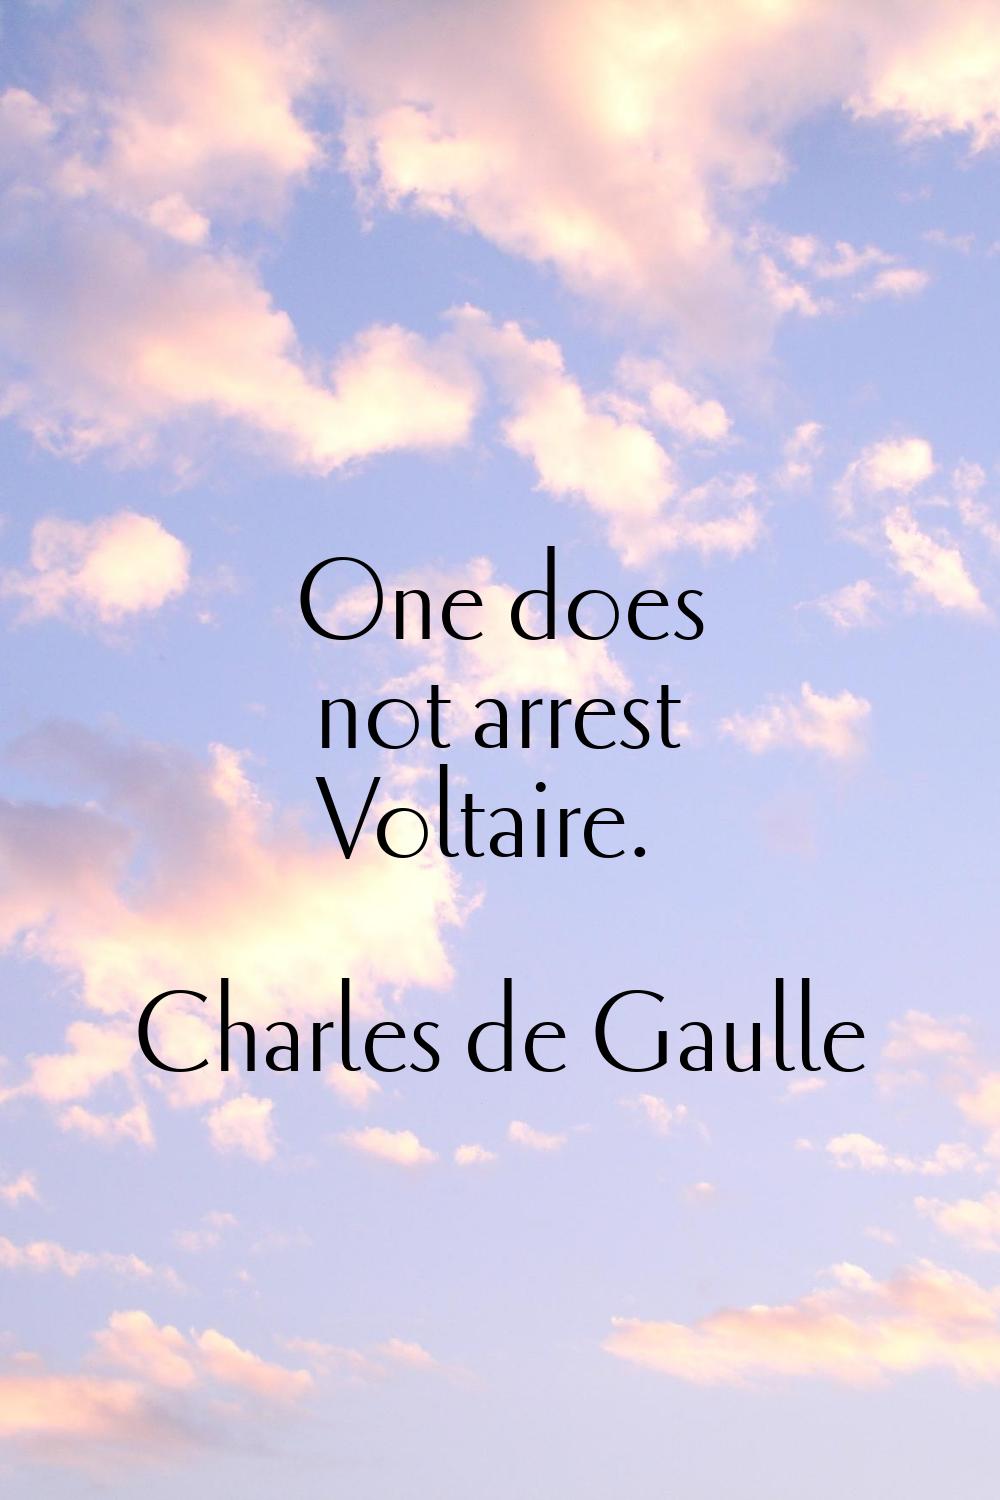 One does not arrest Voltaire.